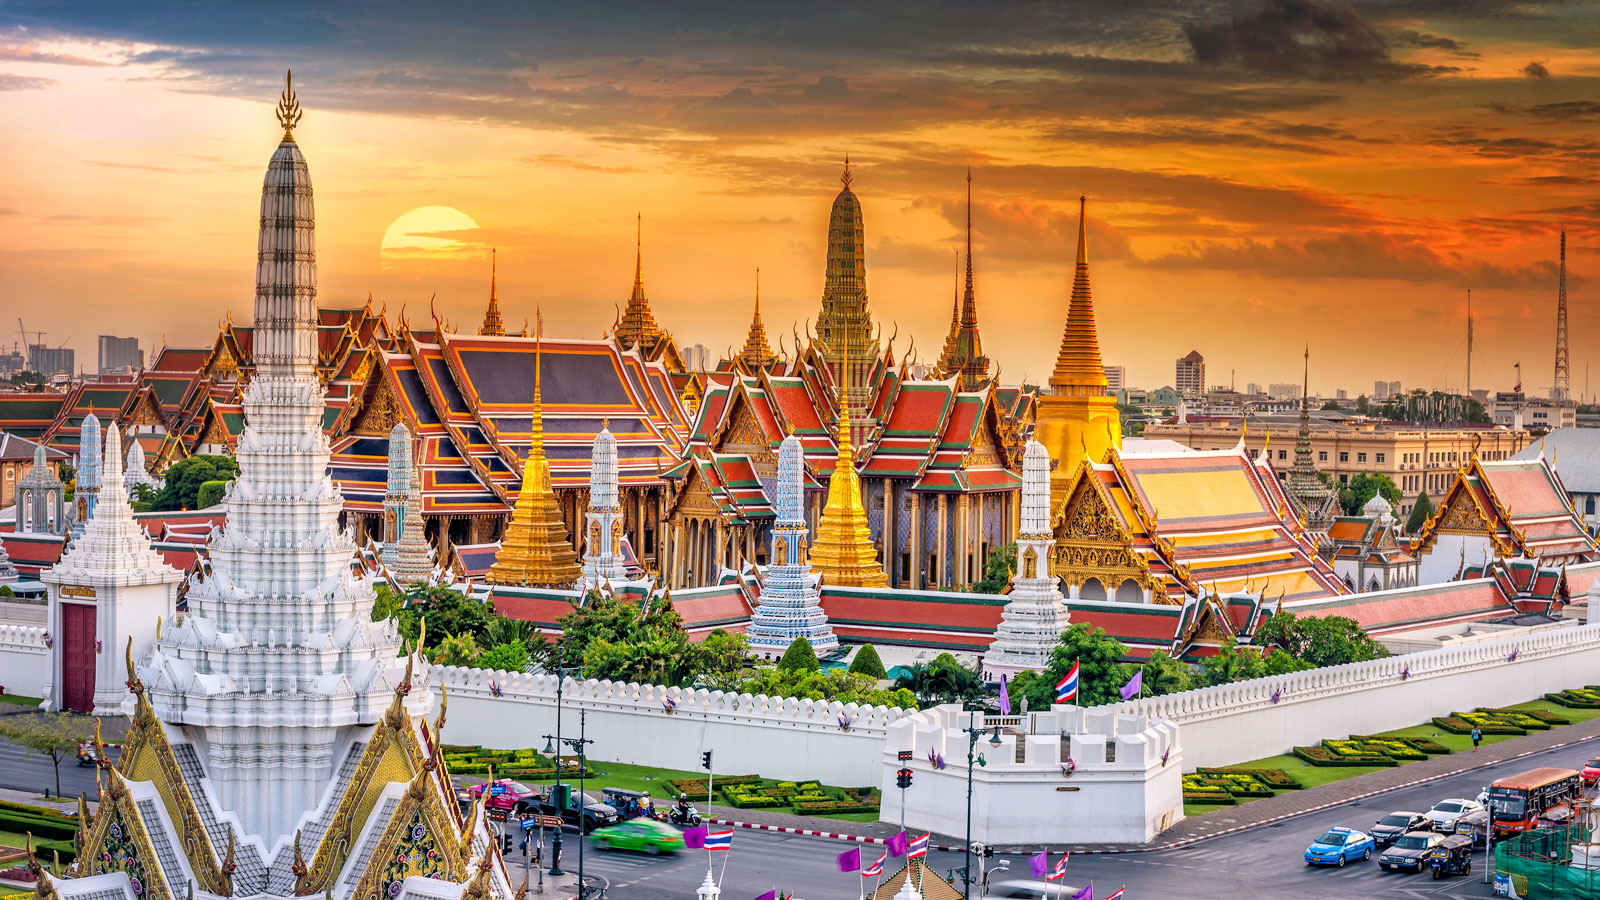 The Grand Palace - Thailand